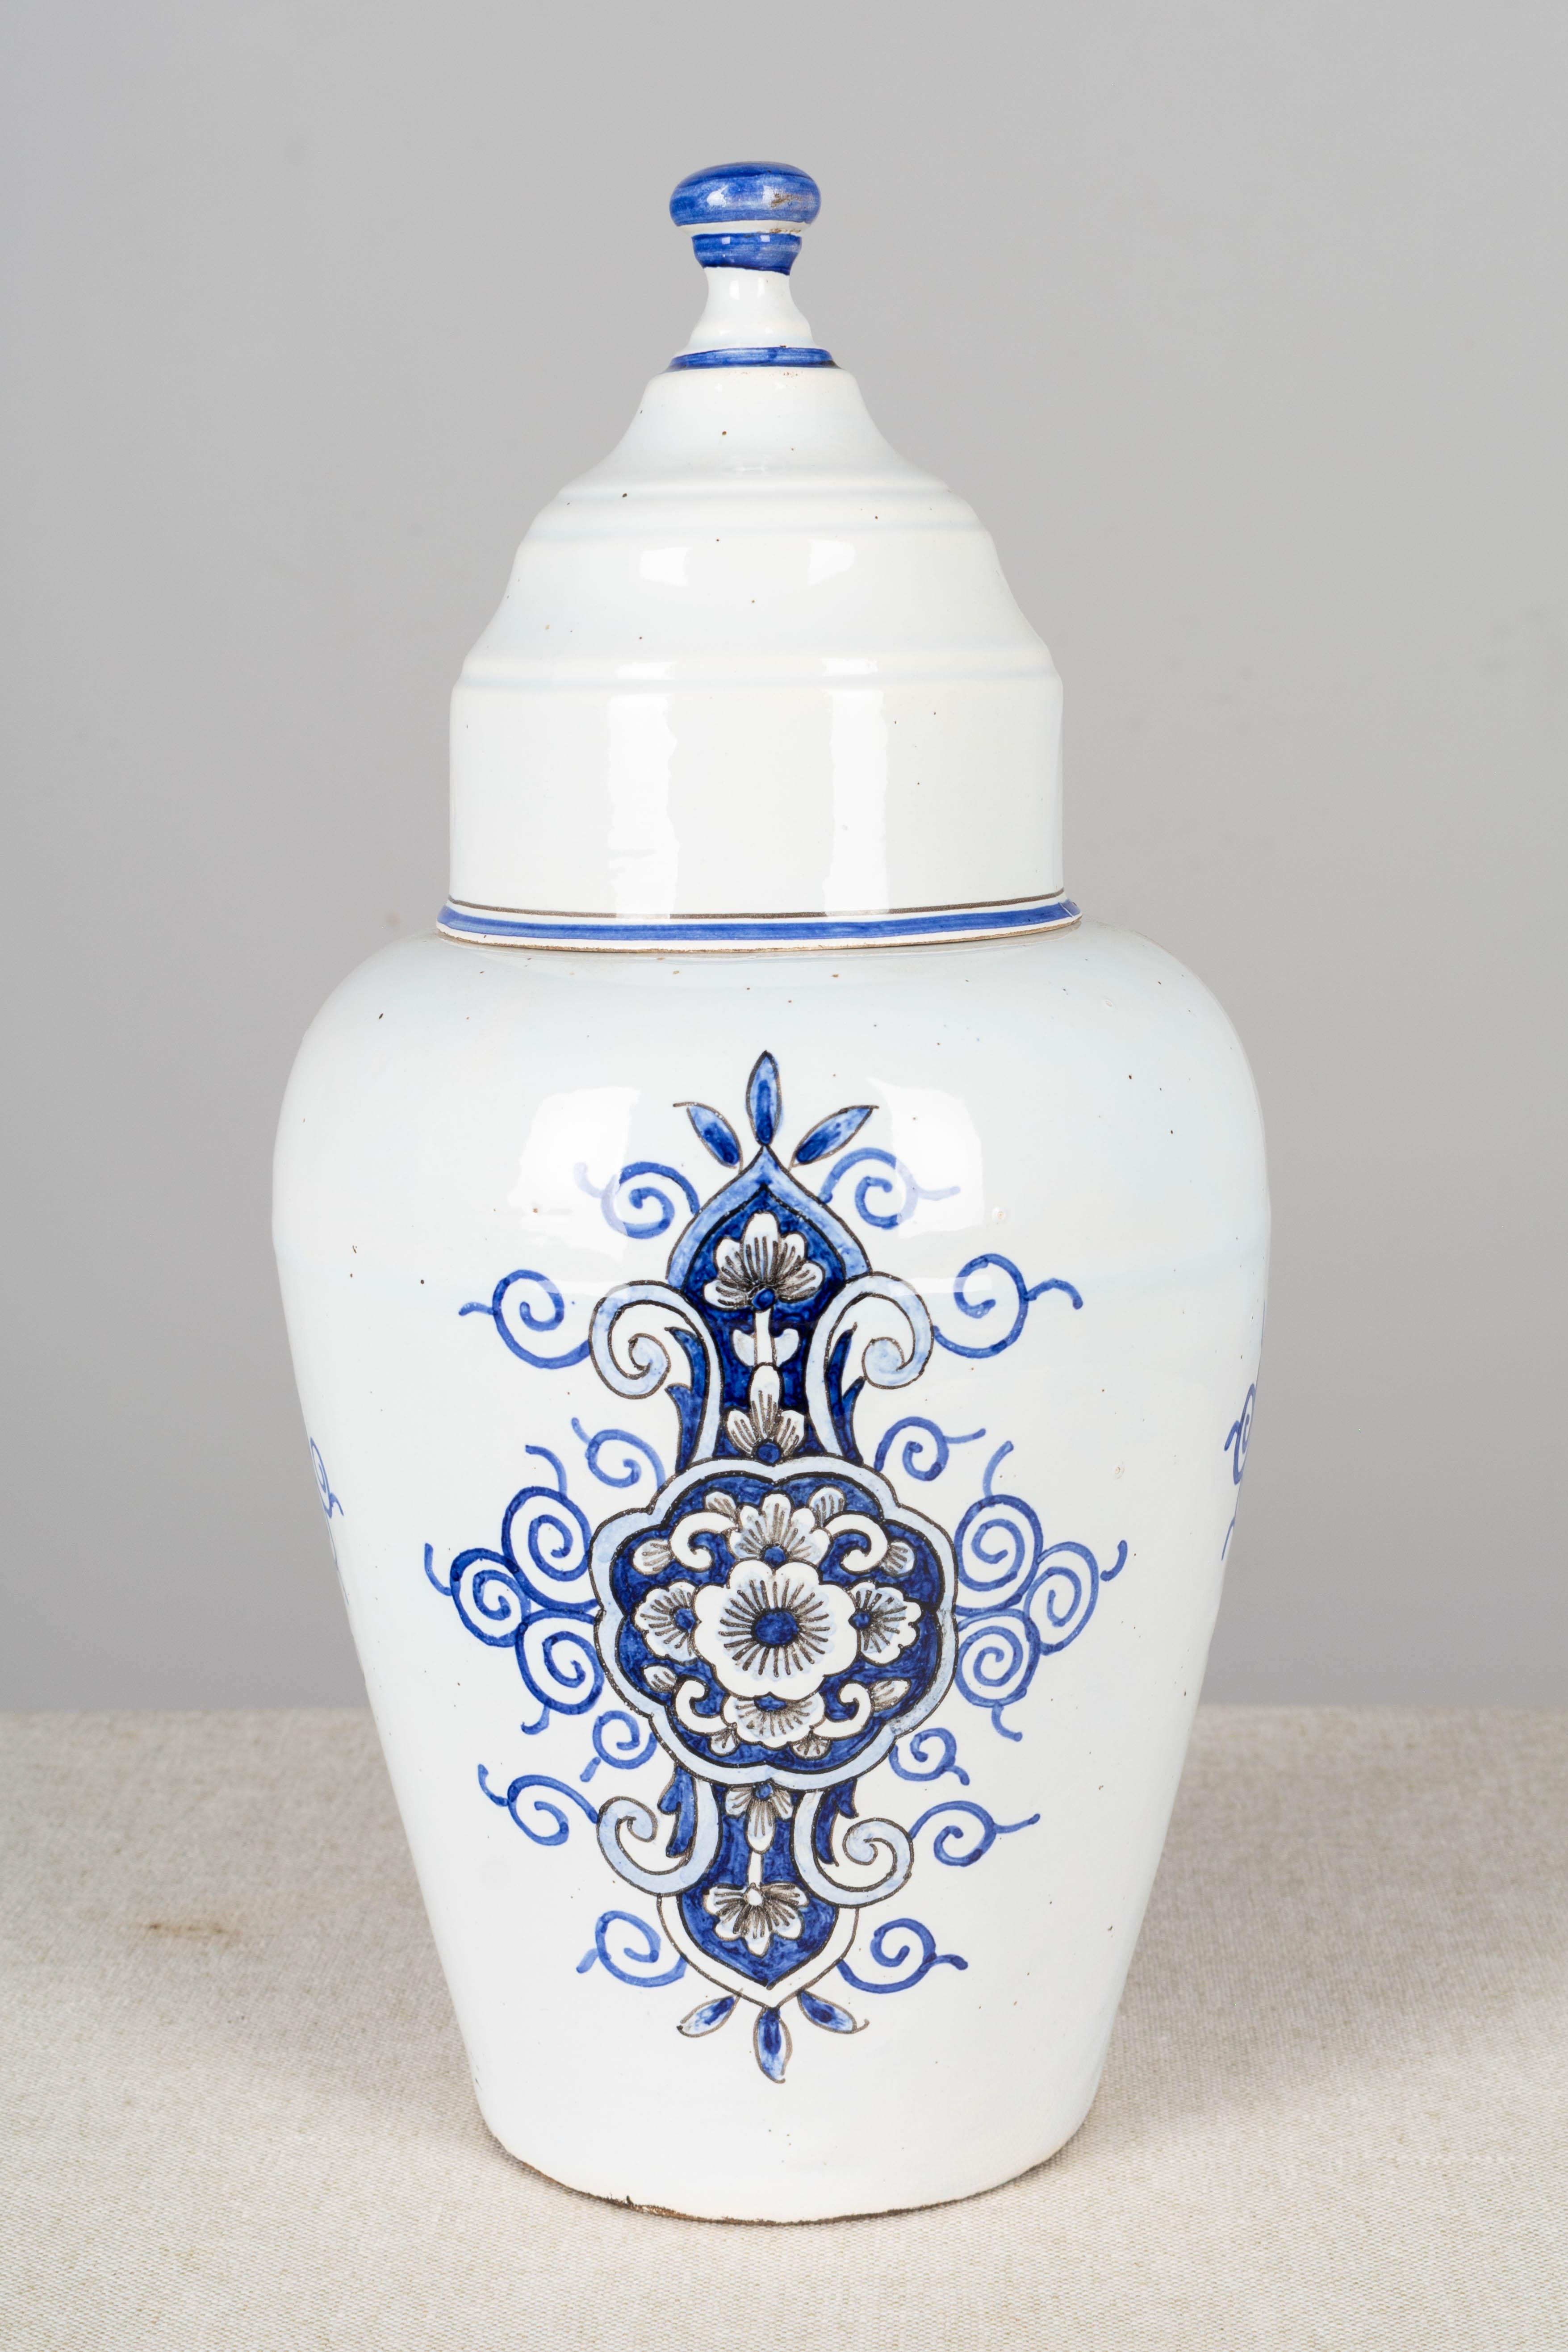 19th Century Delft Faience Apothecary Jar In Good Condition For Sale In Winter Park, FL